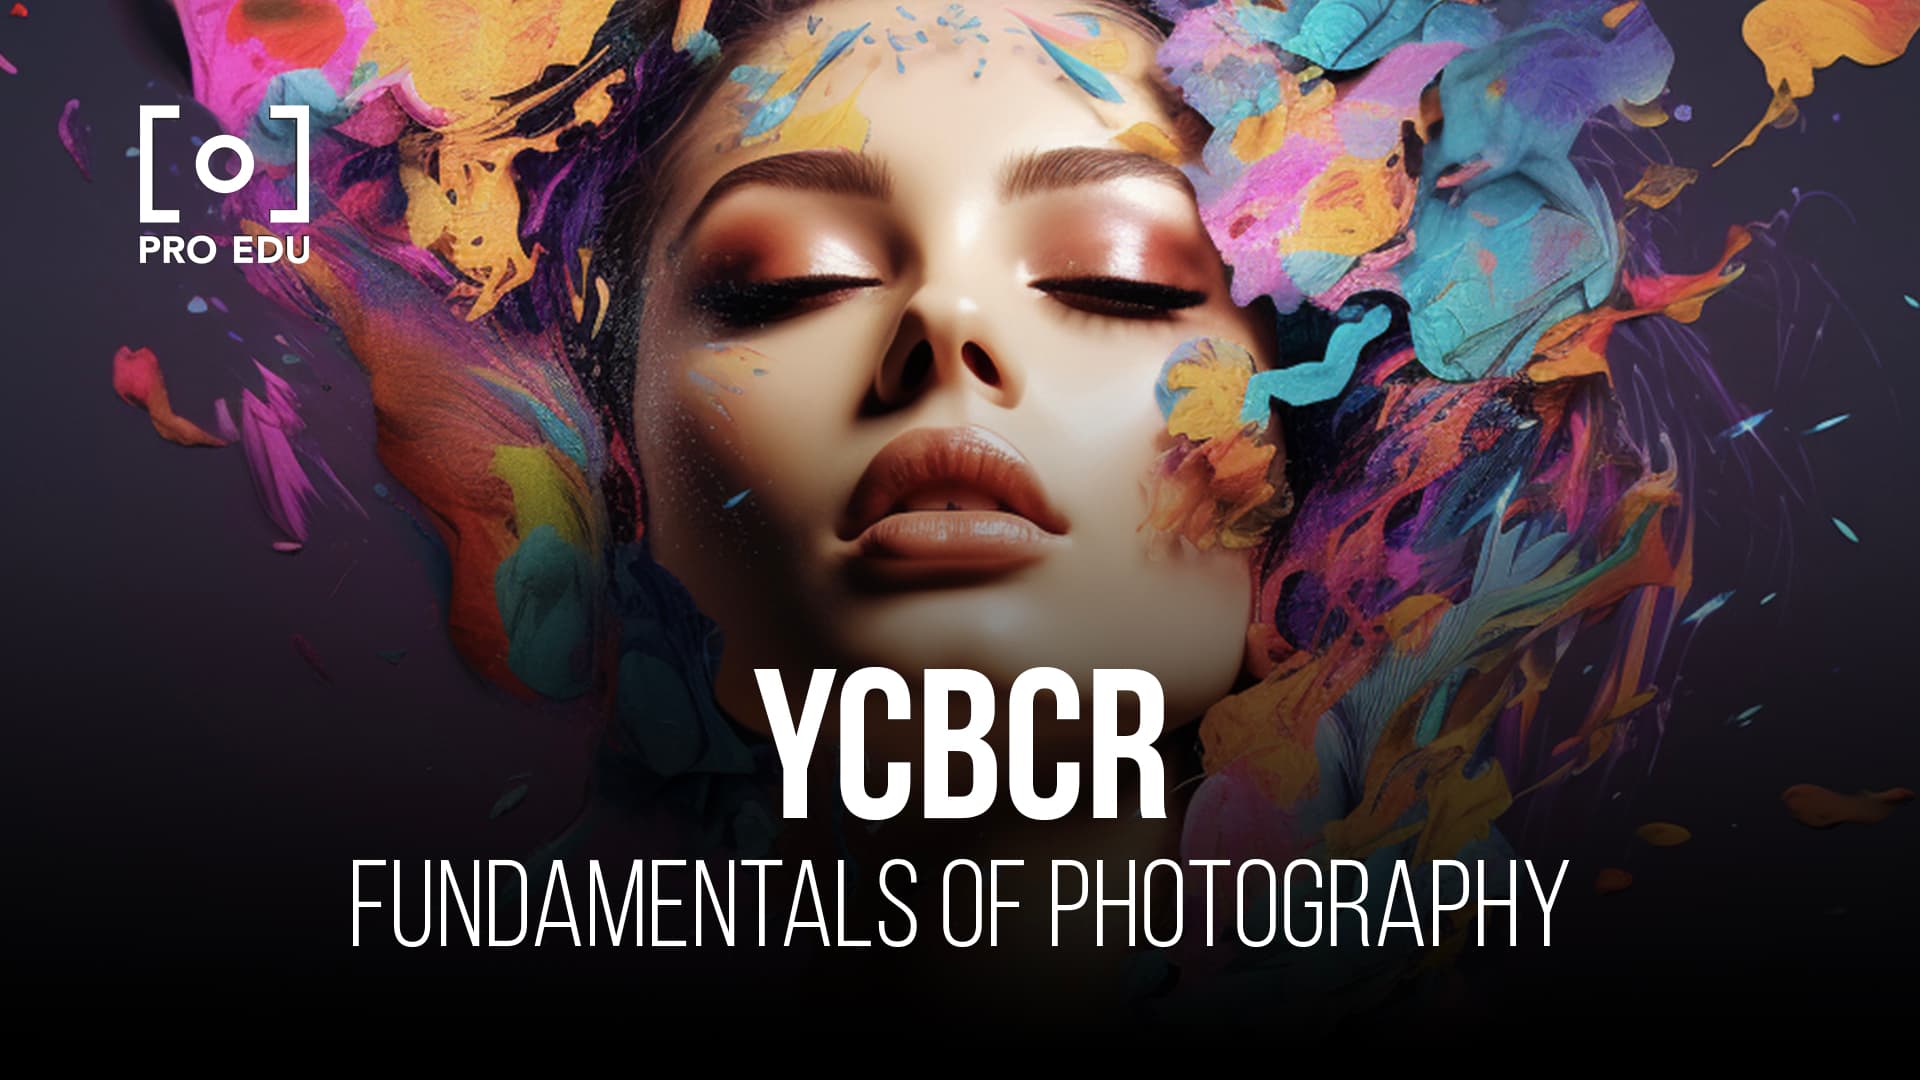 Graphic representation of YCbCr color space in enhancing digital photography quality